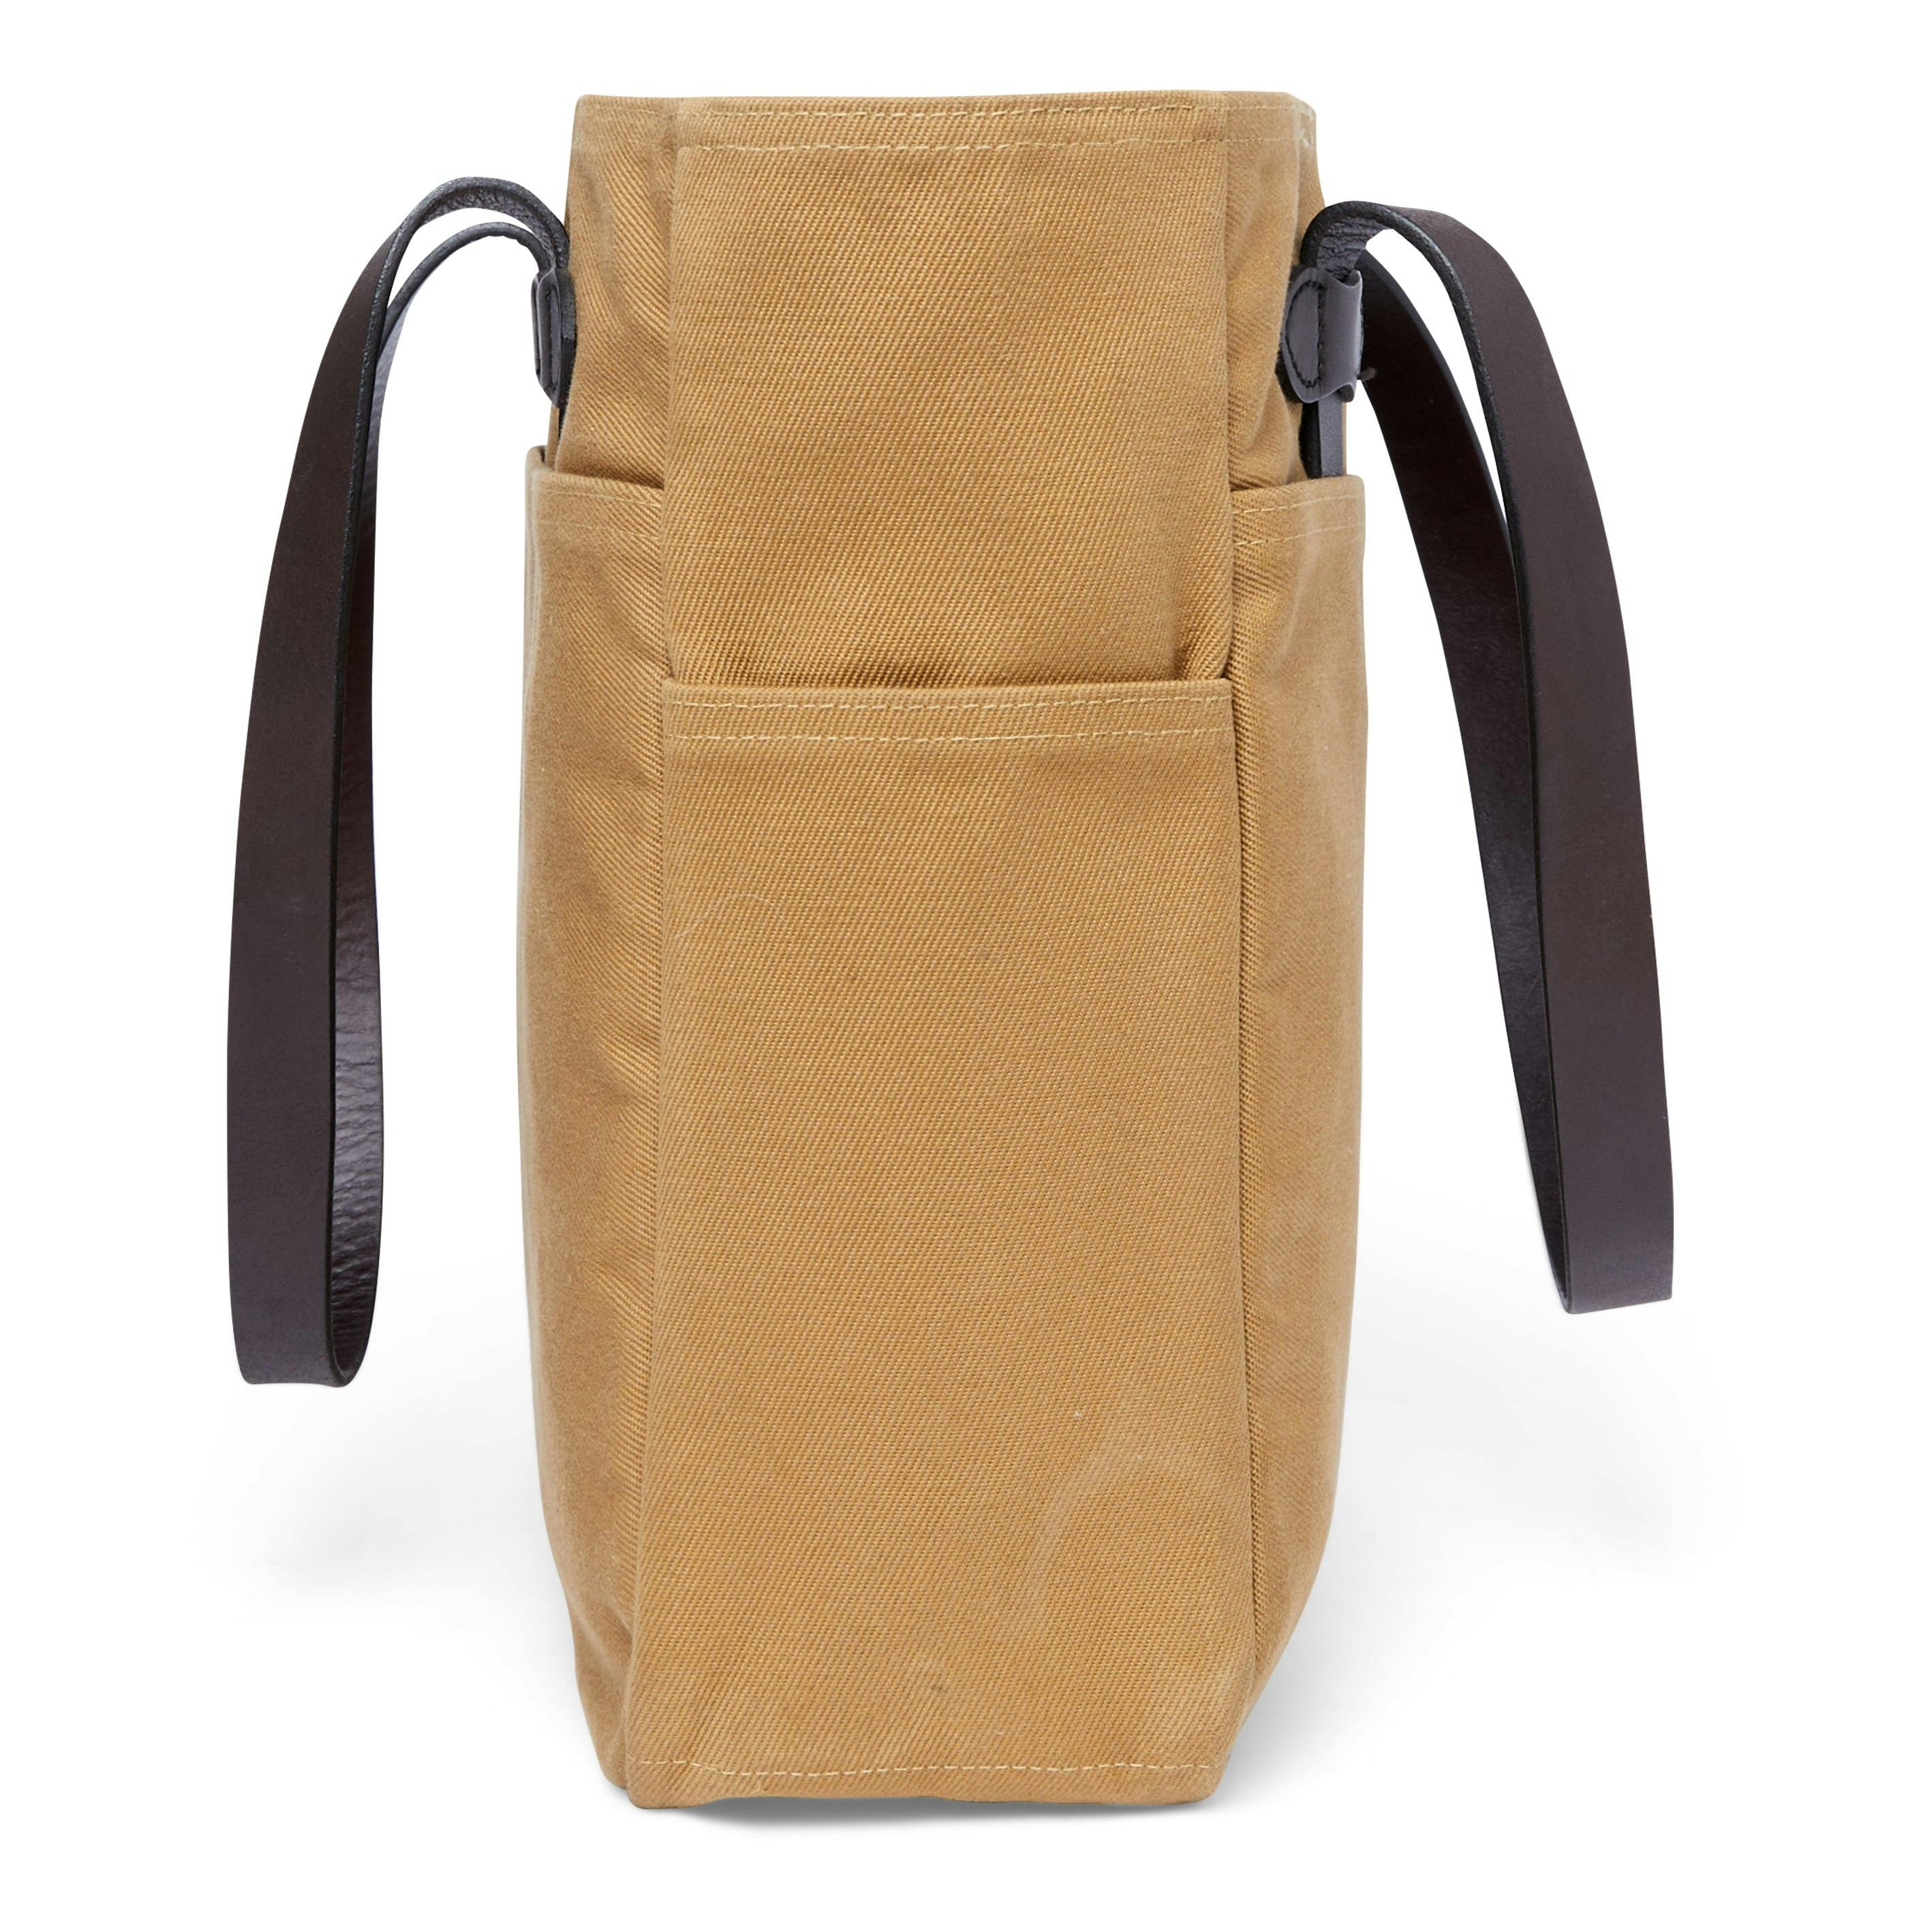 Rugged Twill Tote Bag — Open Tote